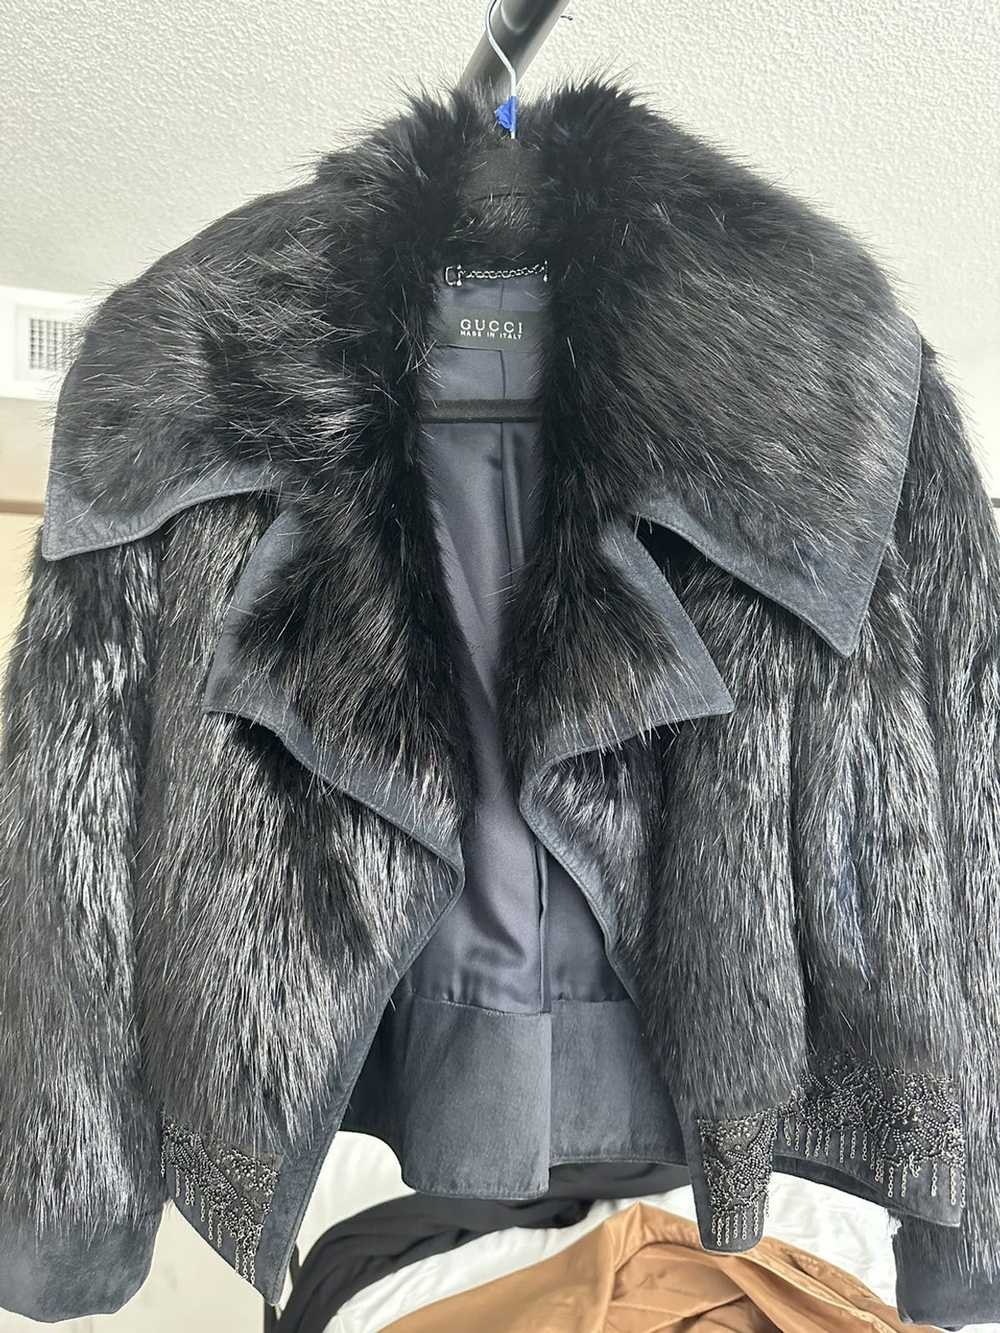 Authentic Vintage Tom Ford For Gucci Fur Coat 1999 Collection